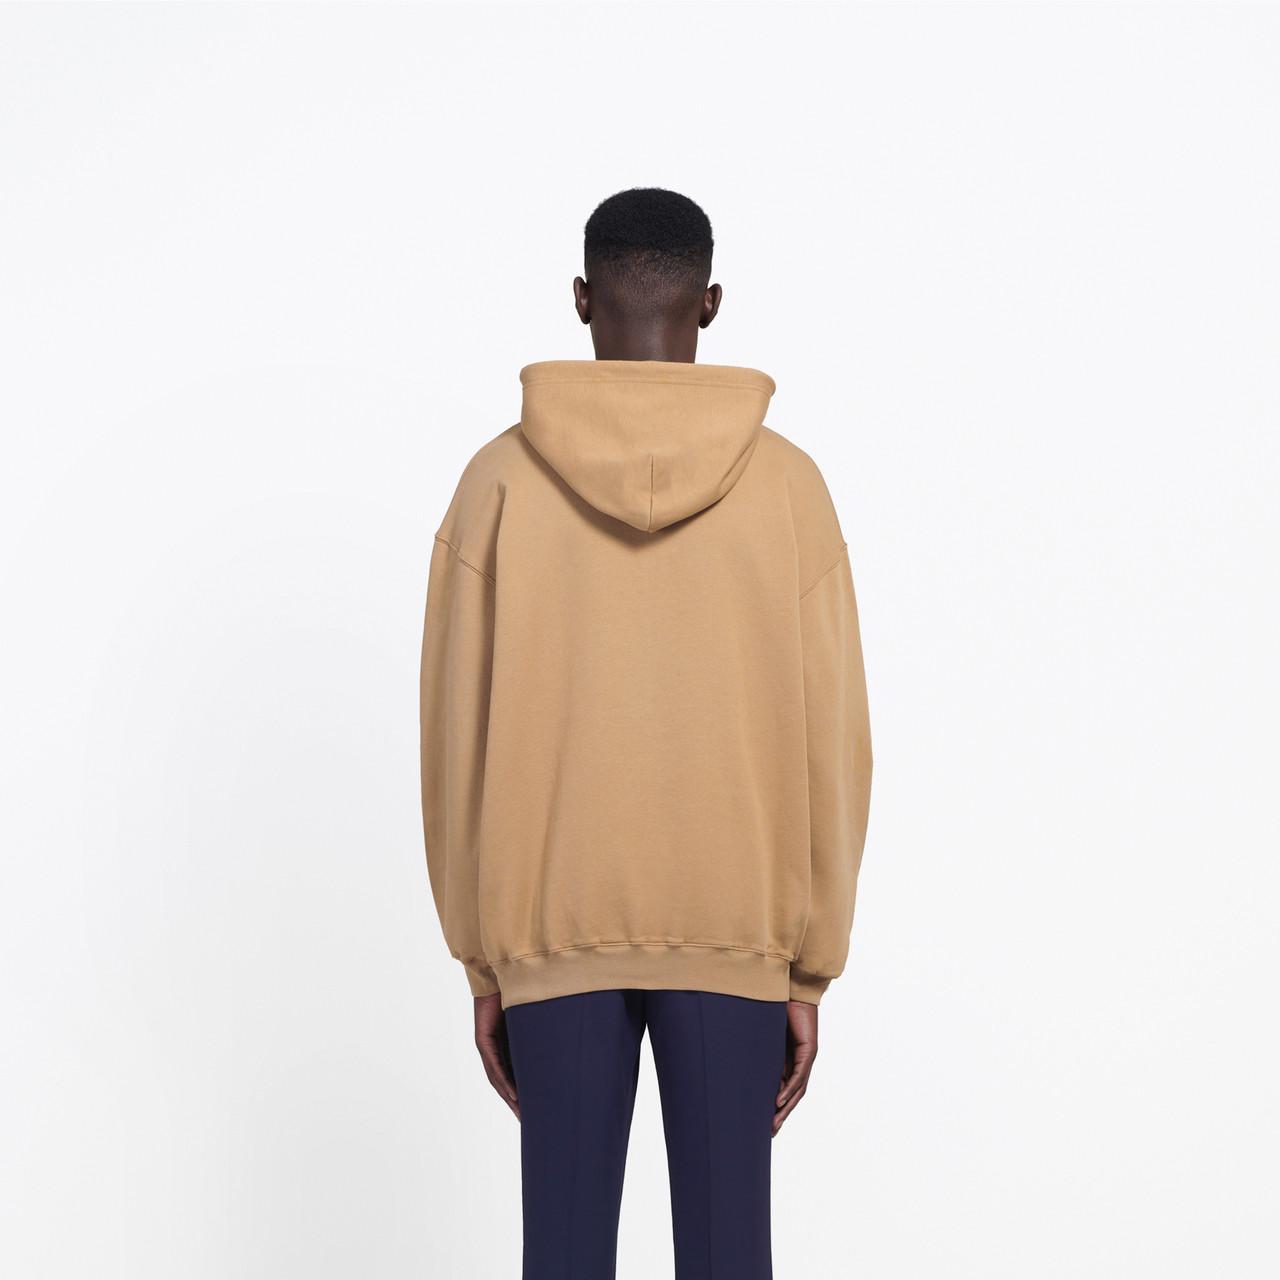 Balenciaga Bb Hoodie in Natural for Men | Lyst